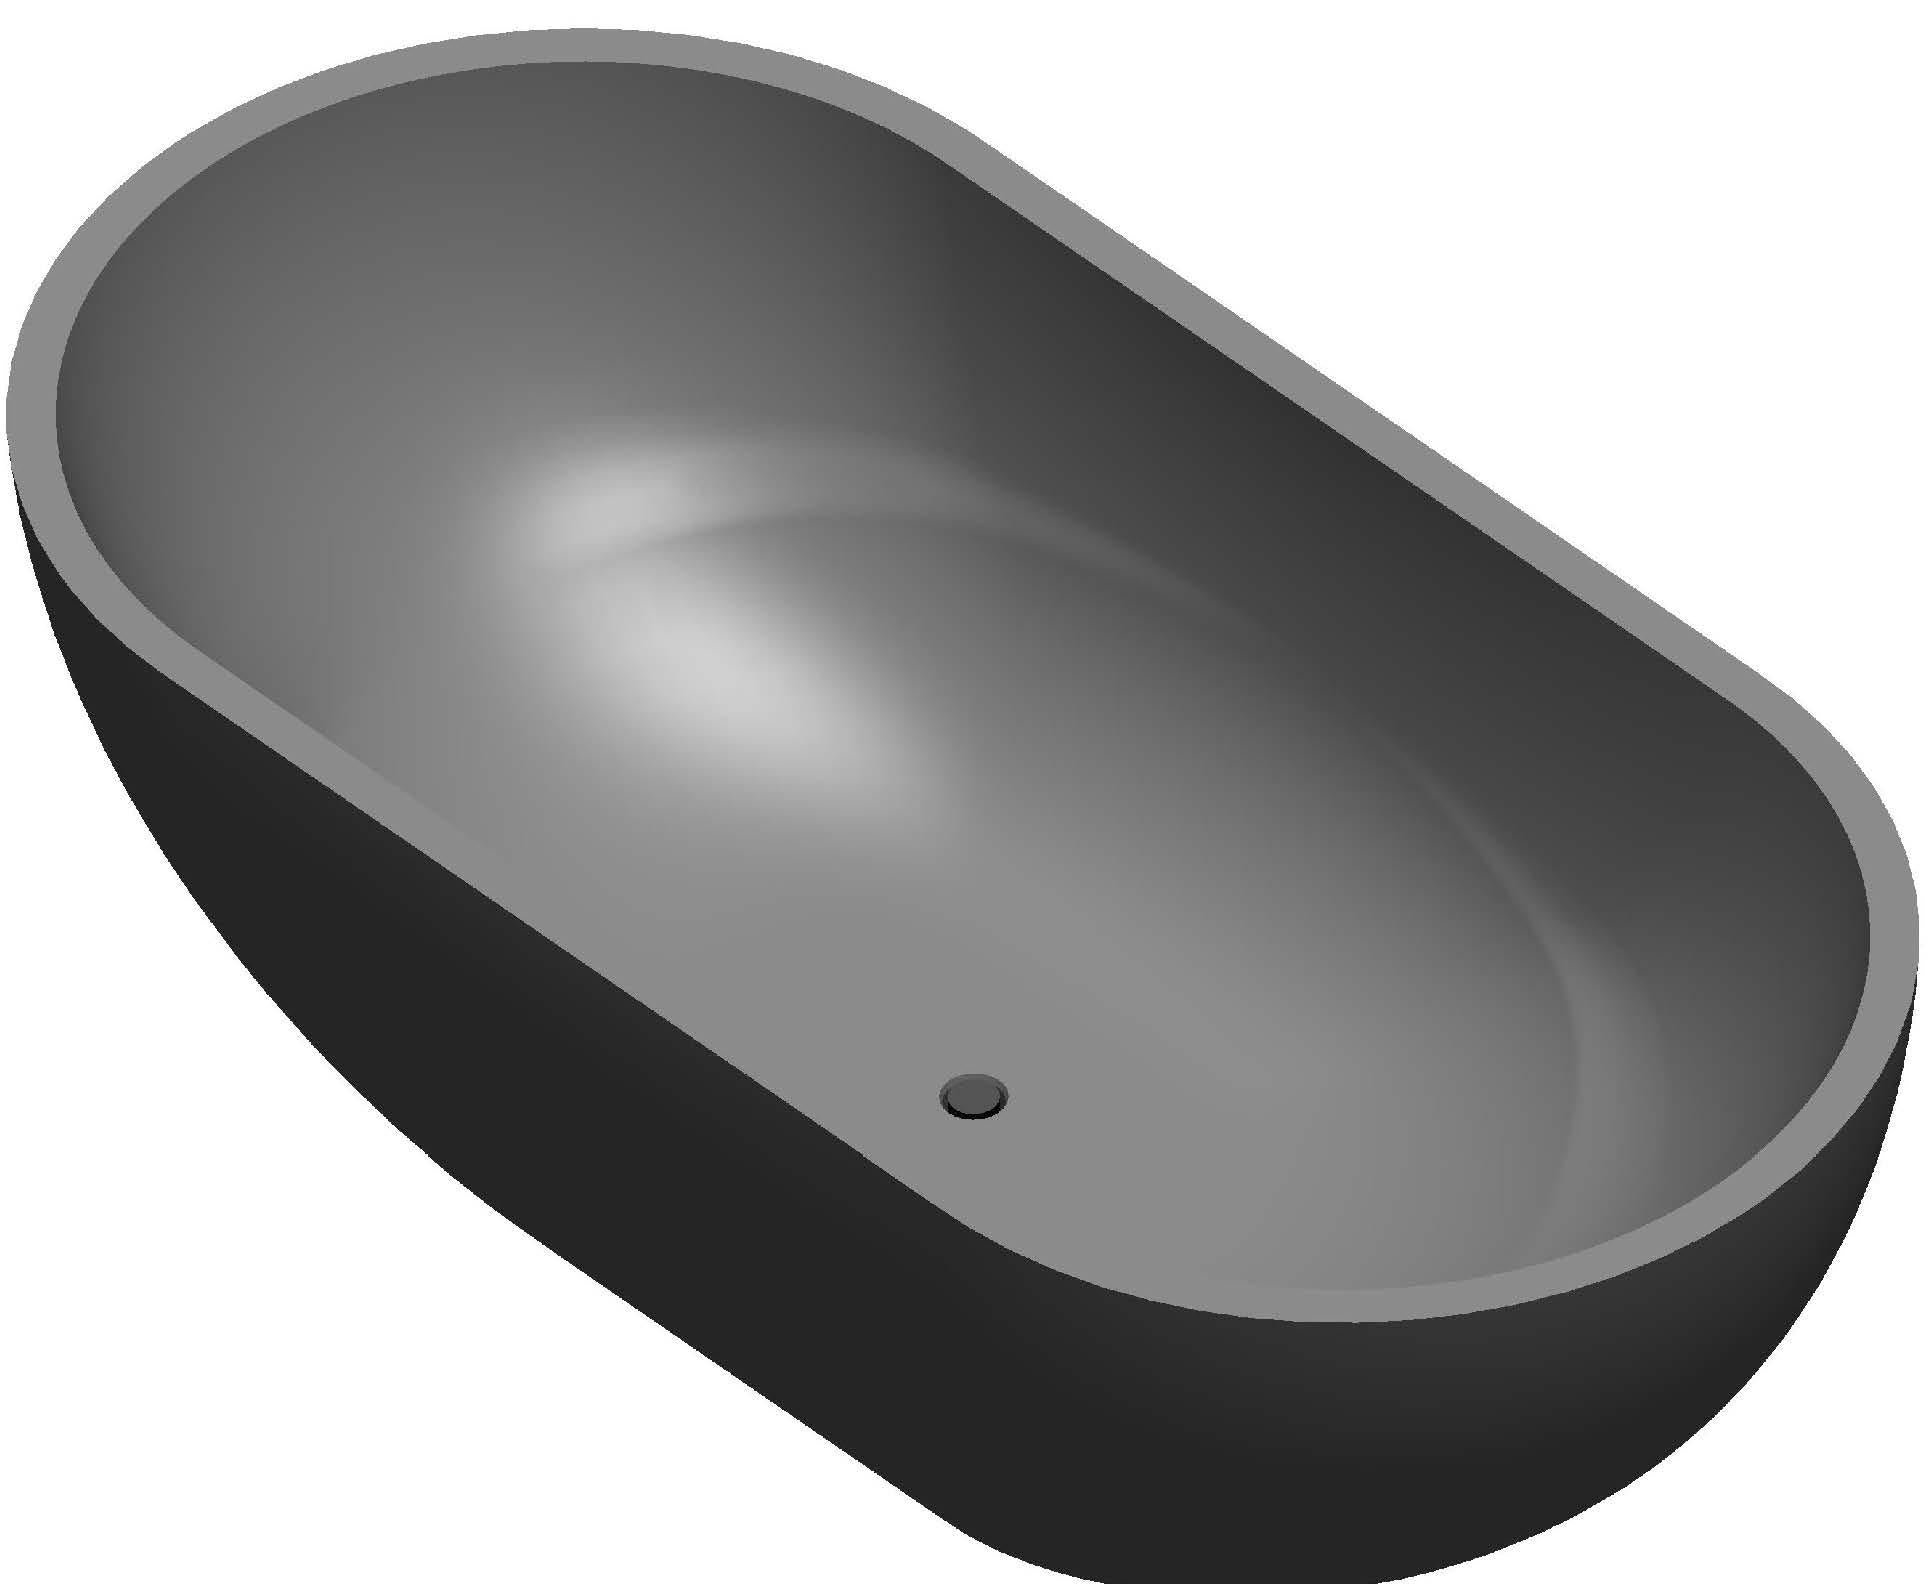 PIETRA BIANCA RYESE FREESTANDING STONE BATHTUB WITH MULTICOLOUR (AVAILABLE IN 1600MM, 1700MM AND 1800MM)